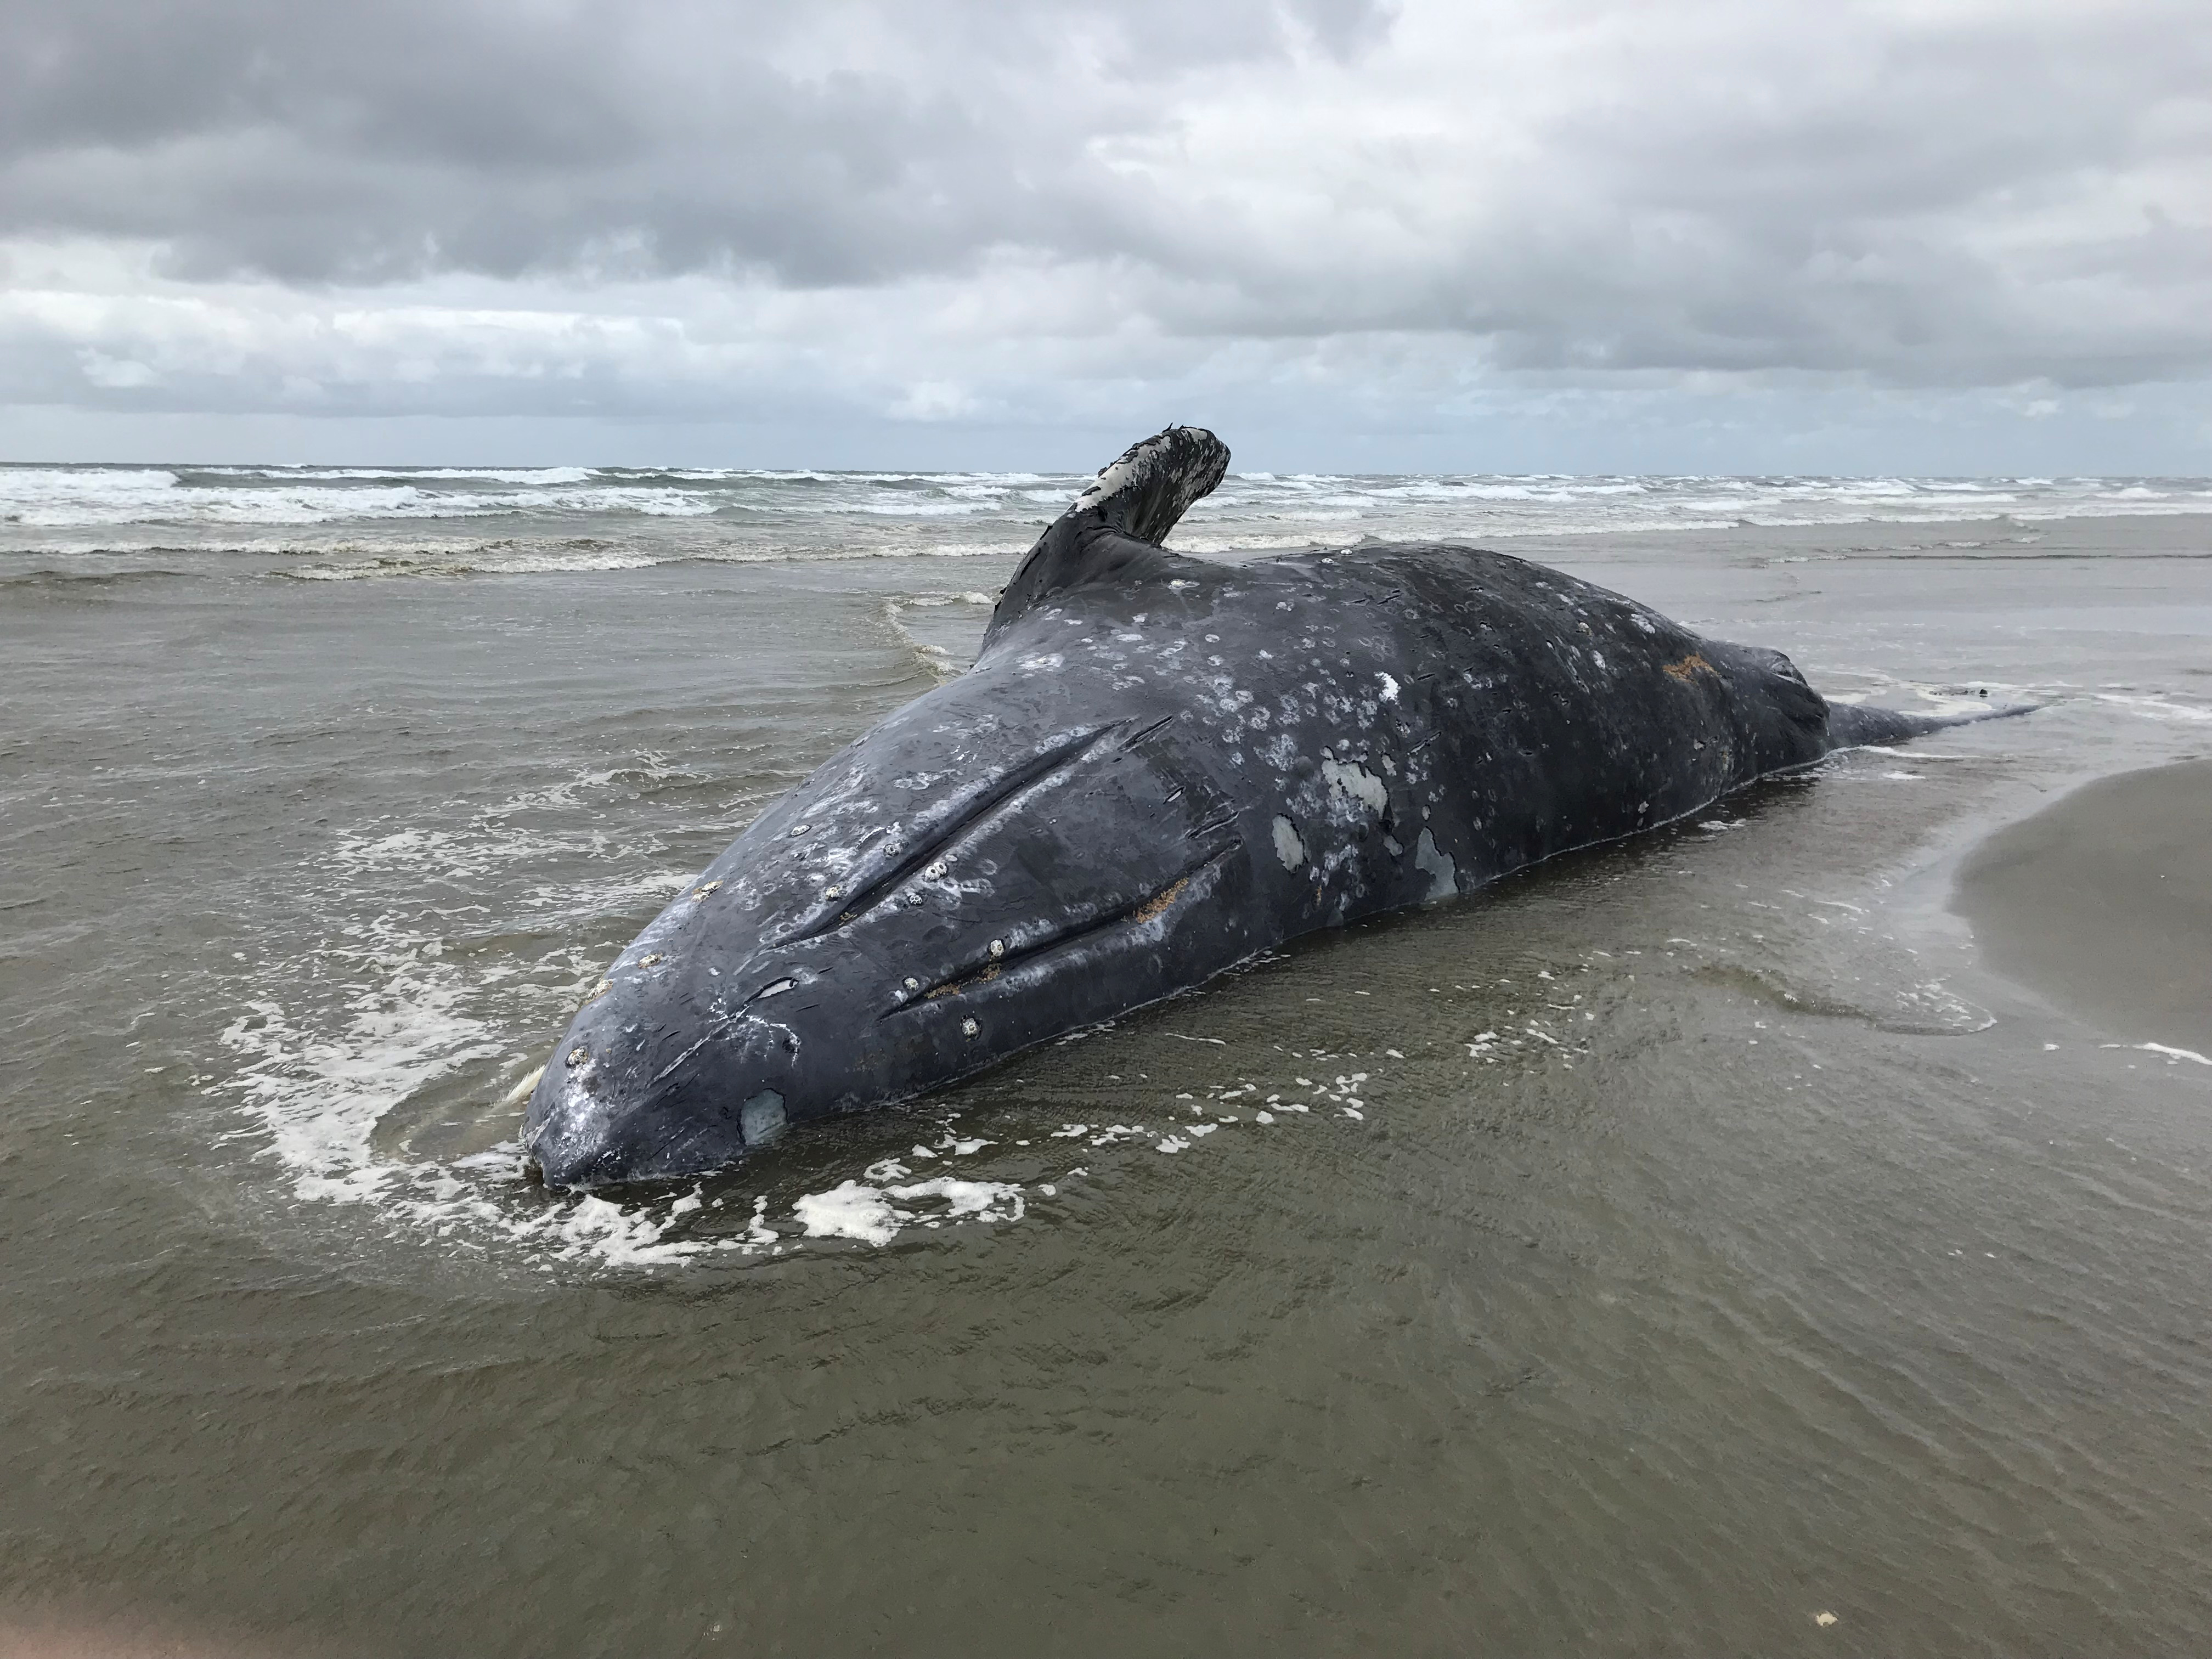 U.S. biologists probe deaths of 70 emaciated gray whales - ArcticToday